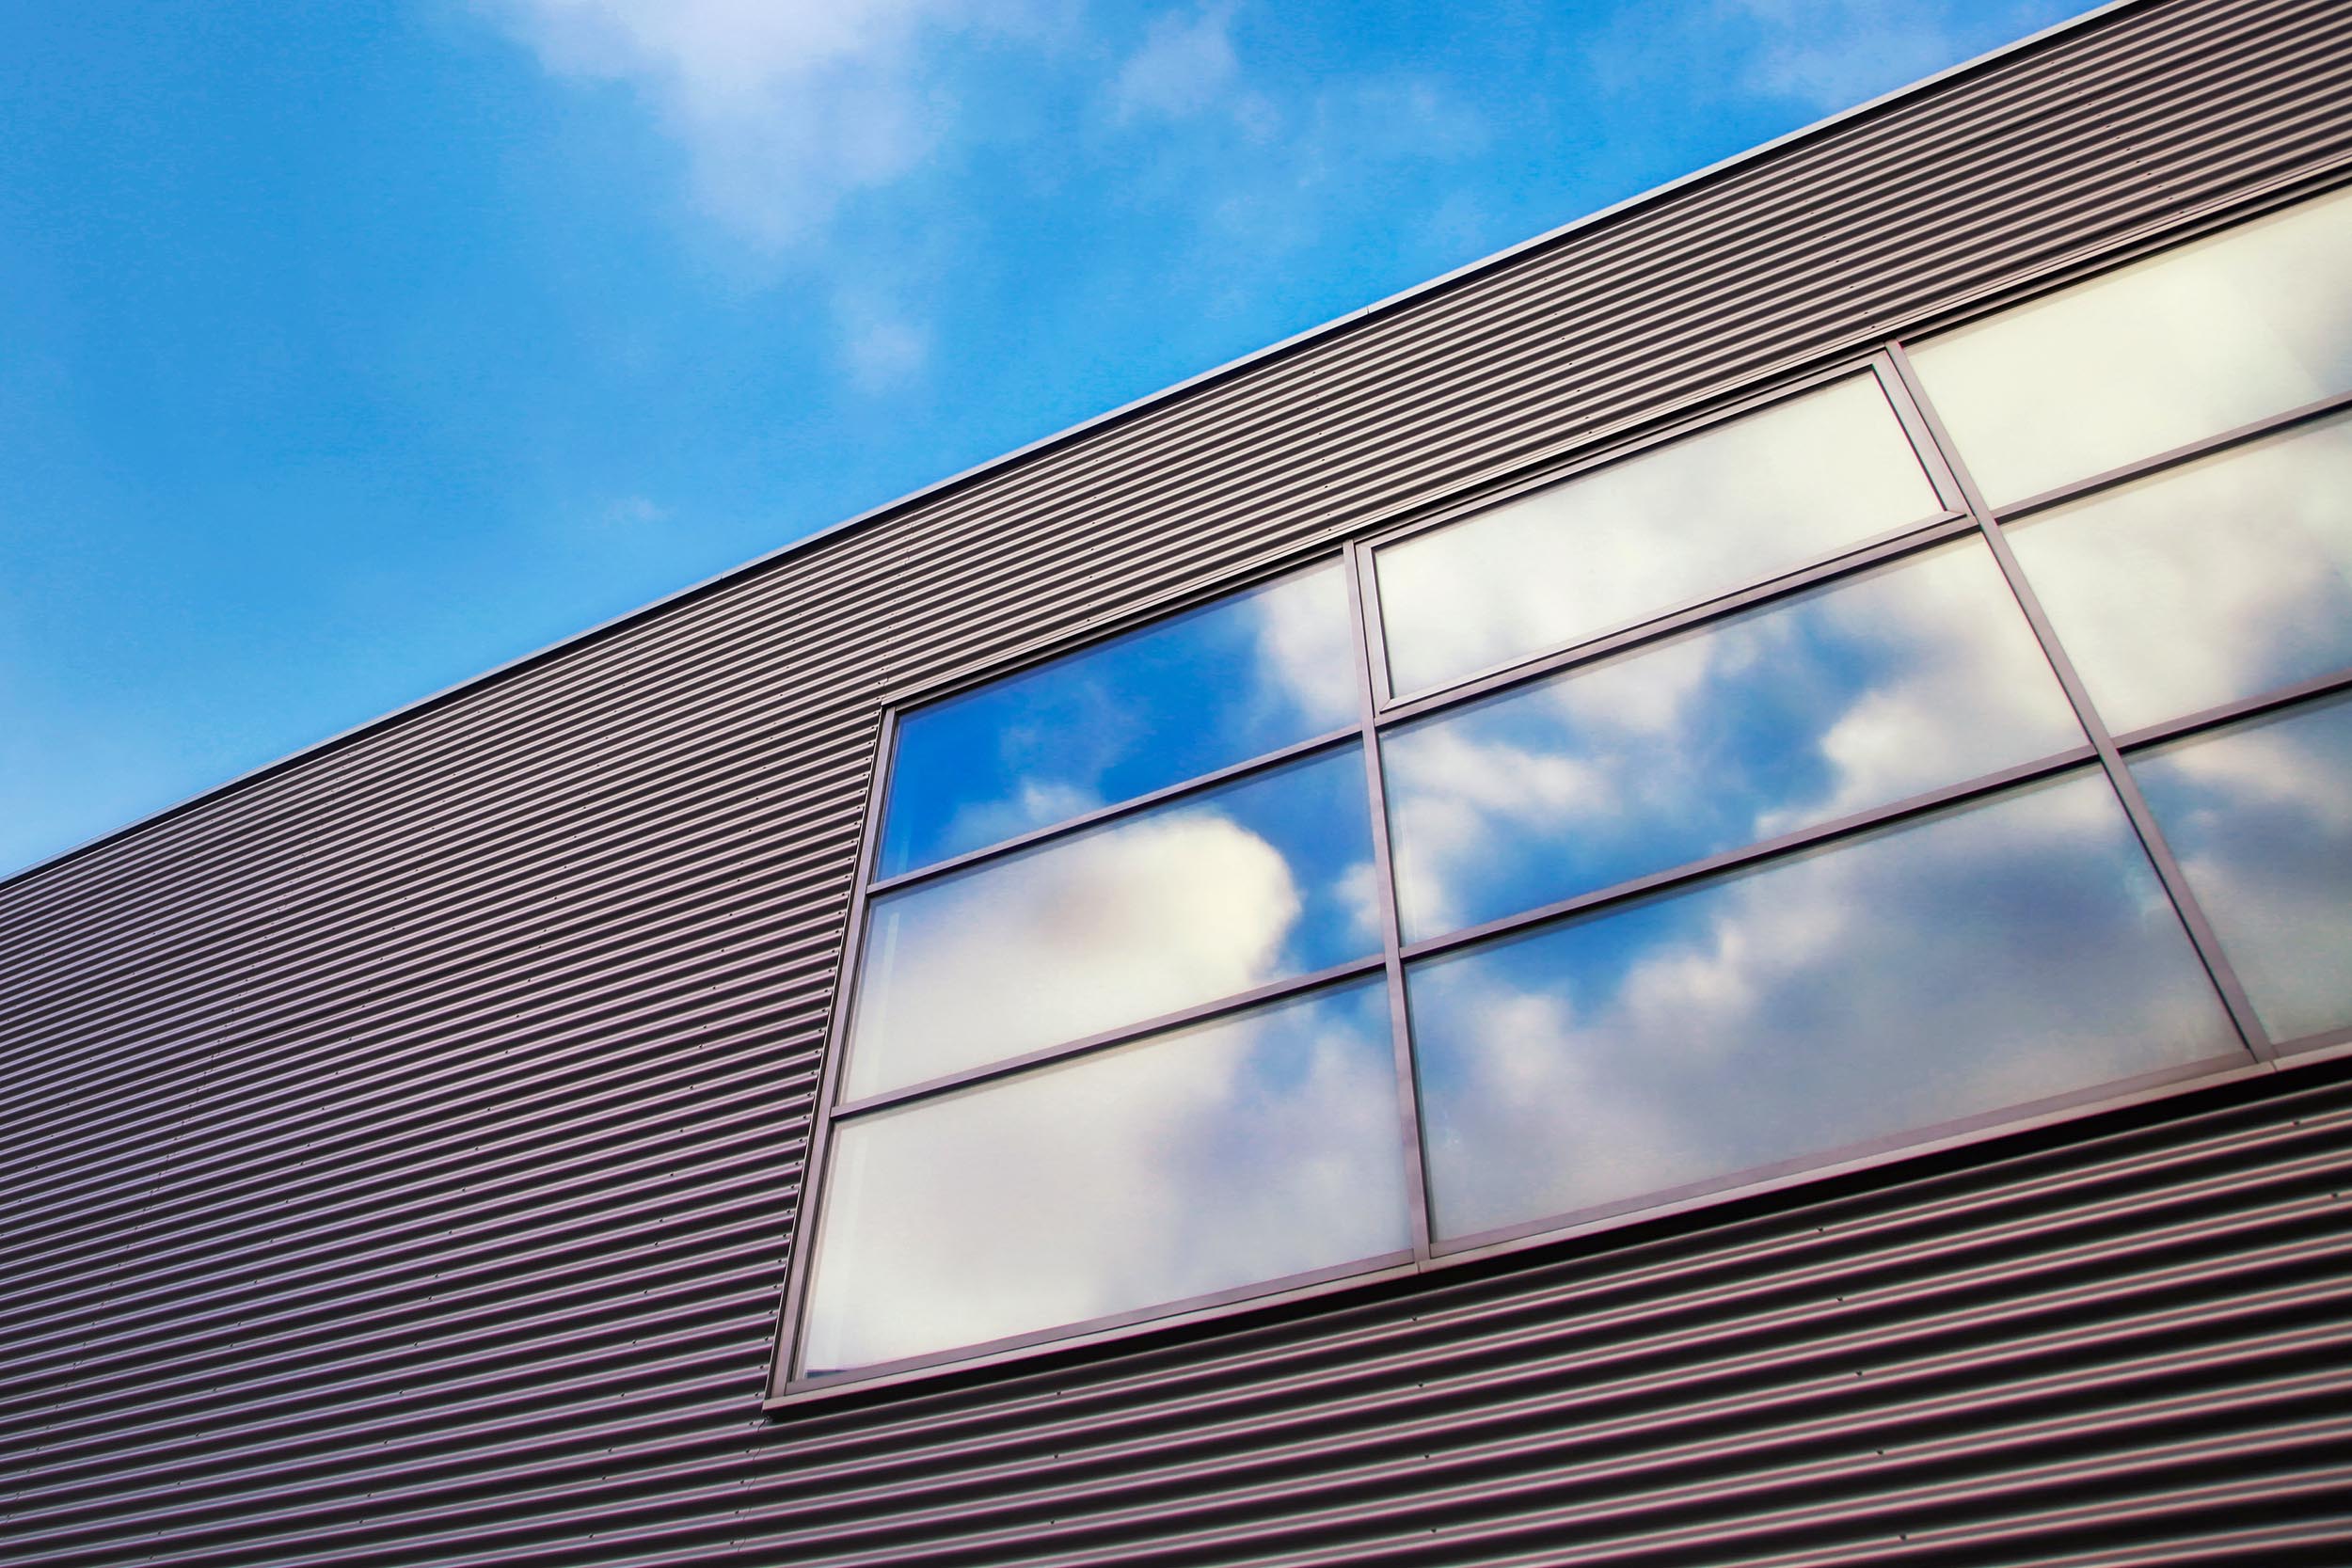 PEMB exterior windows with clouds reflected